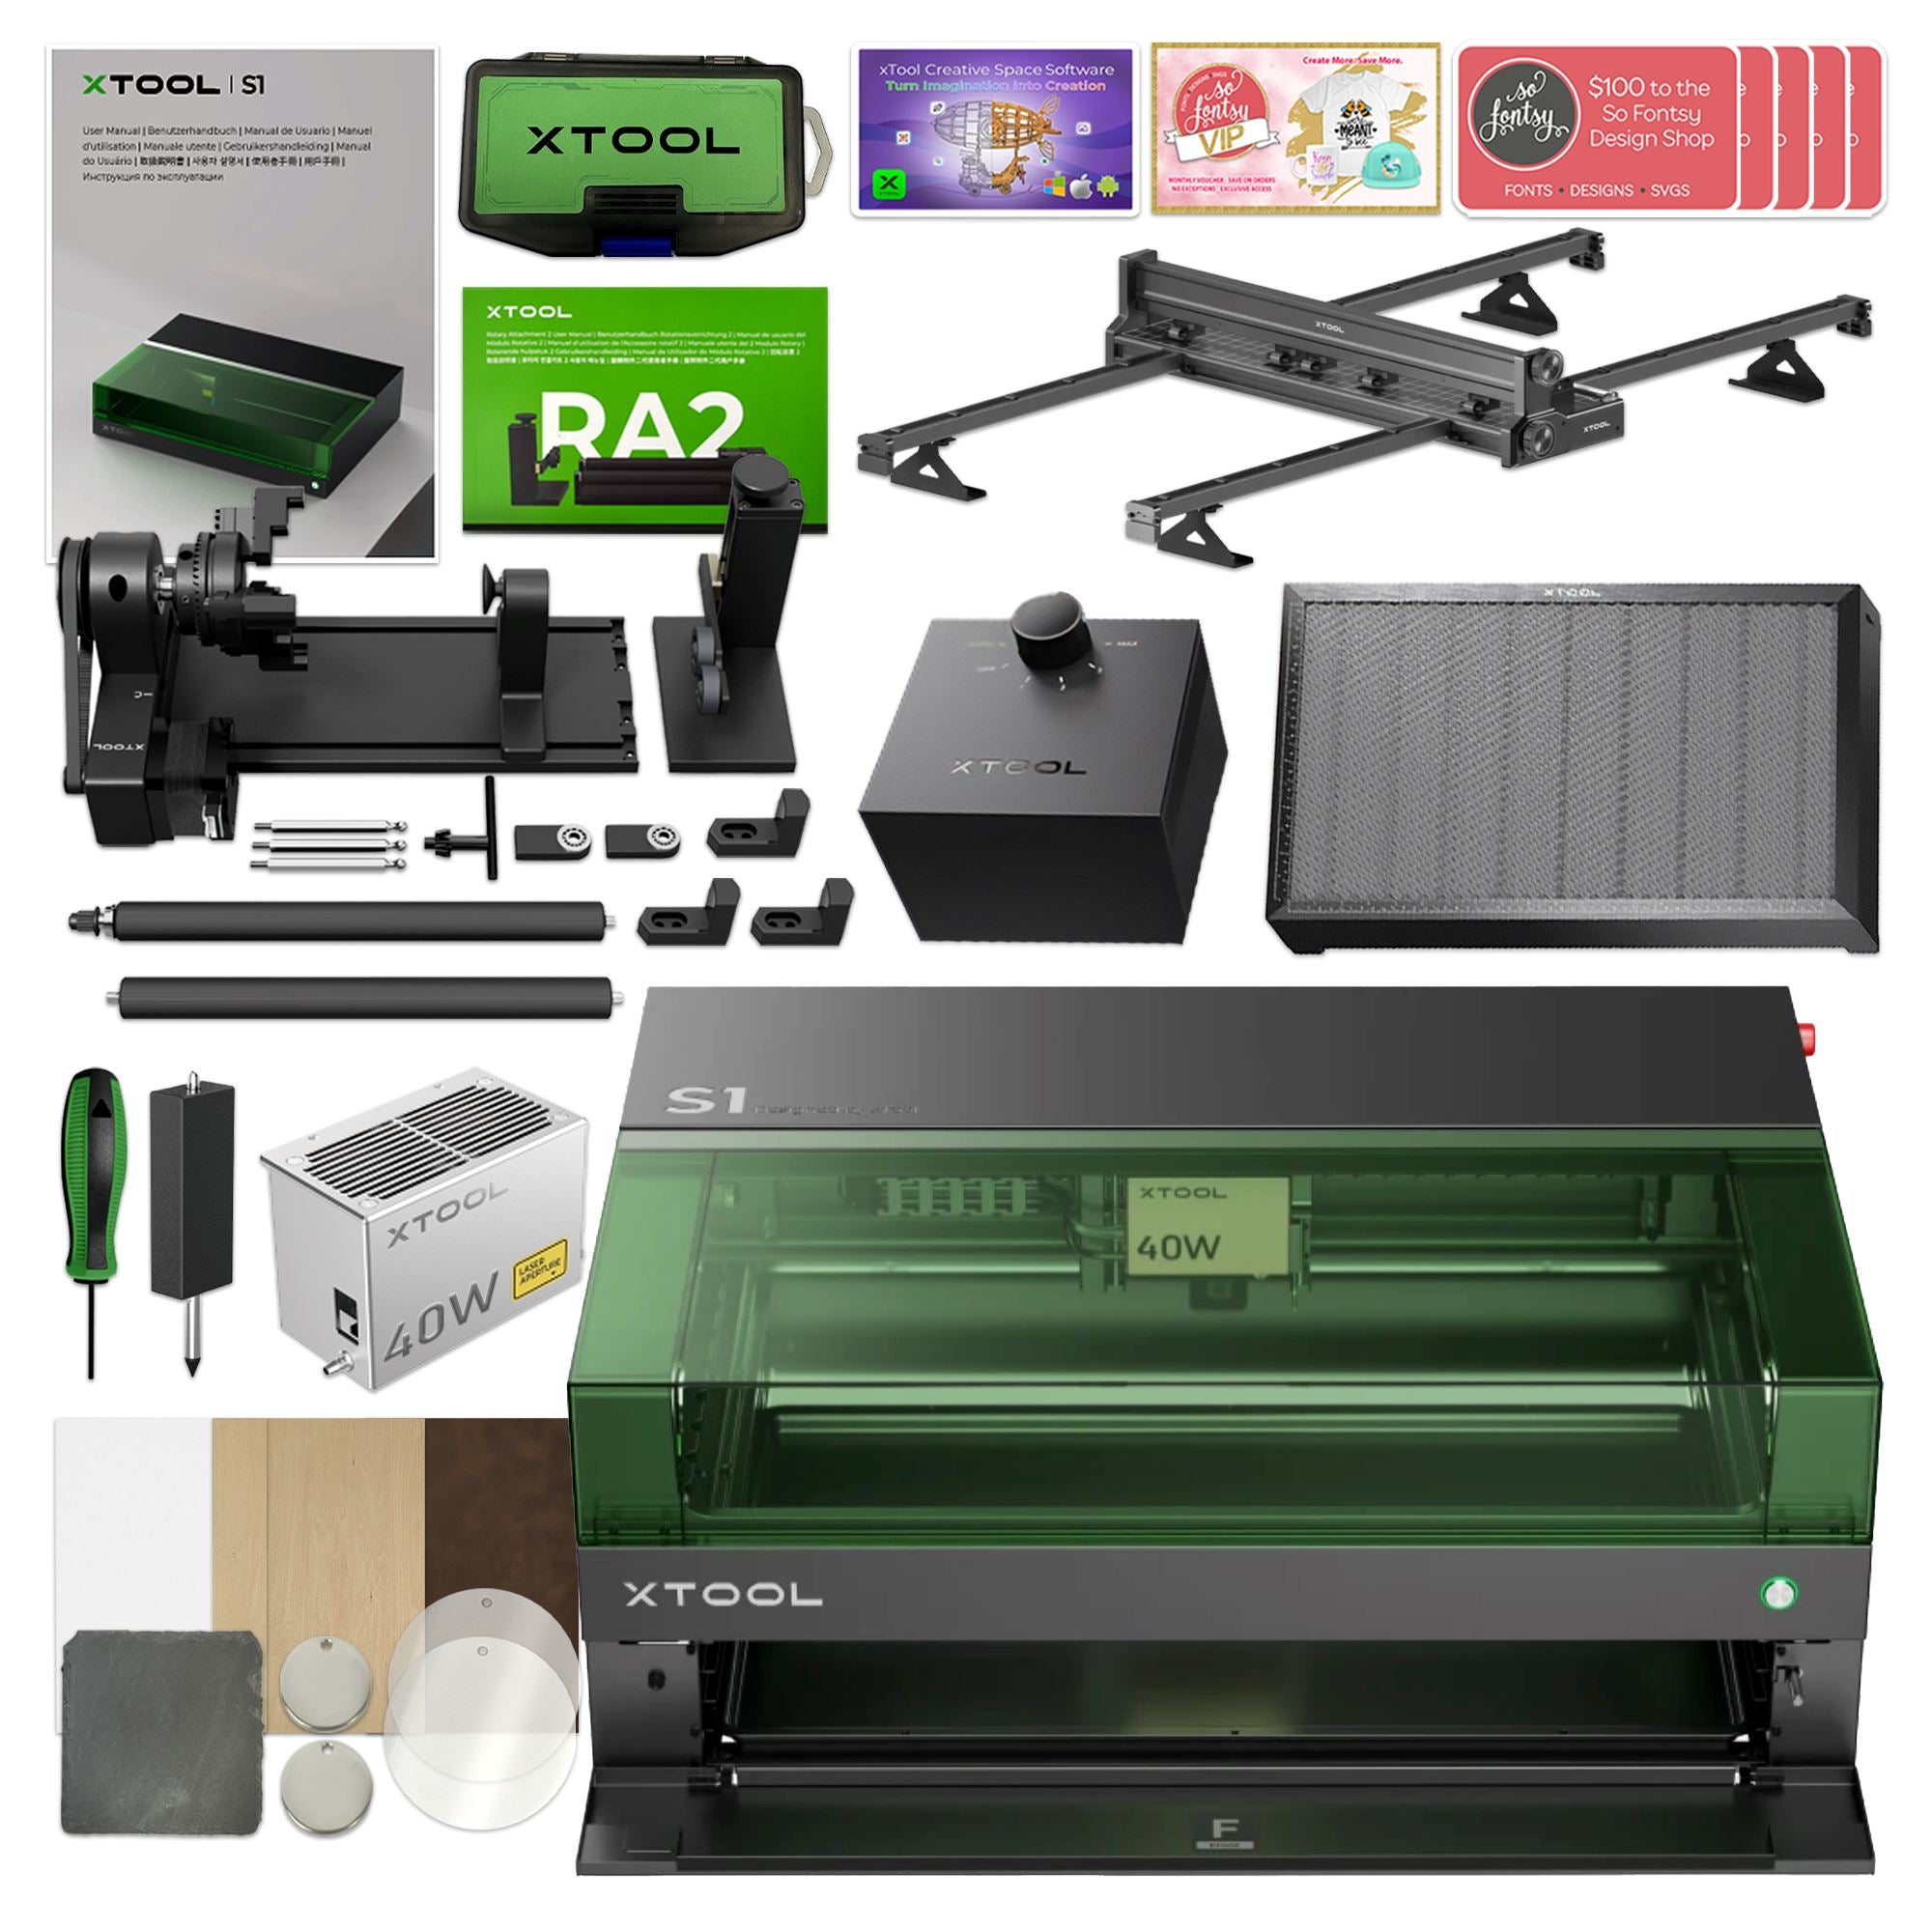 xTool S1 Laser Cutter & Engraver Machine with Deluxe Screen Printing Bundle